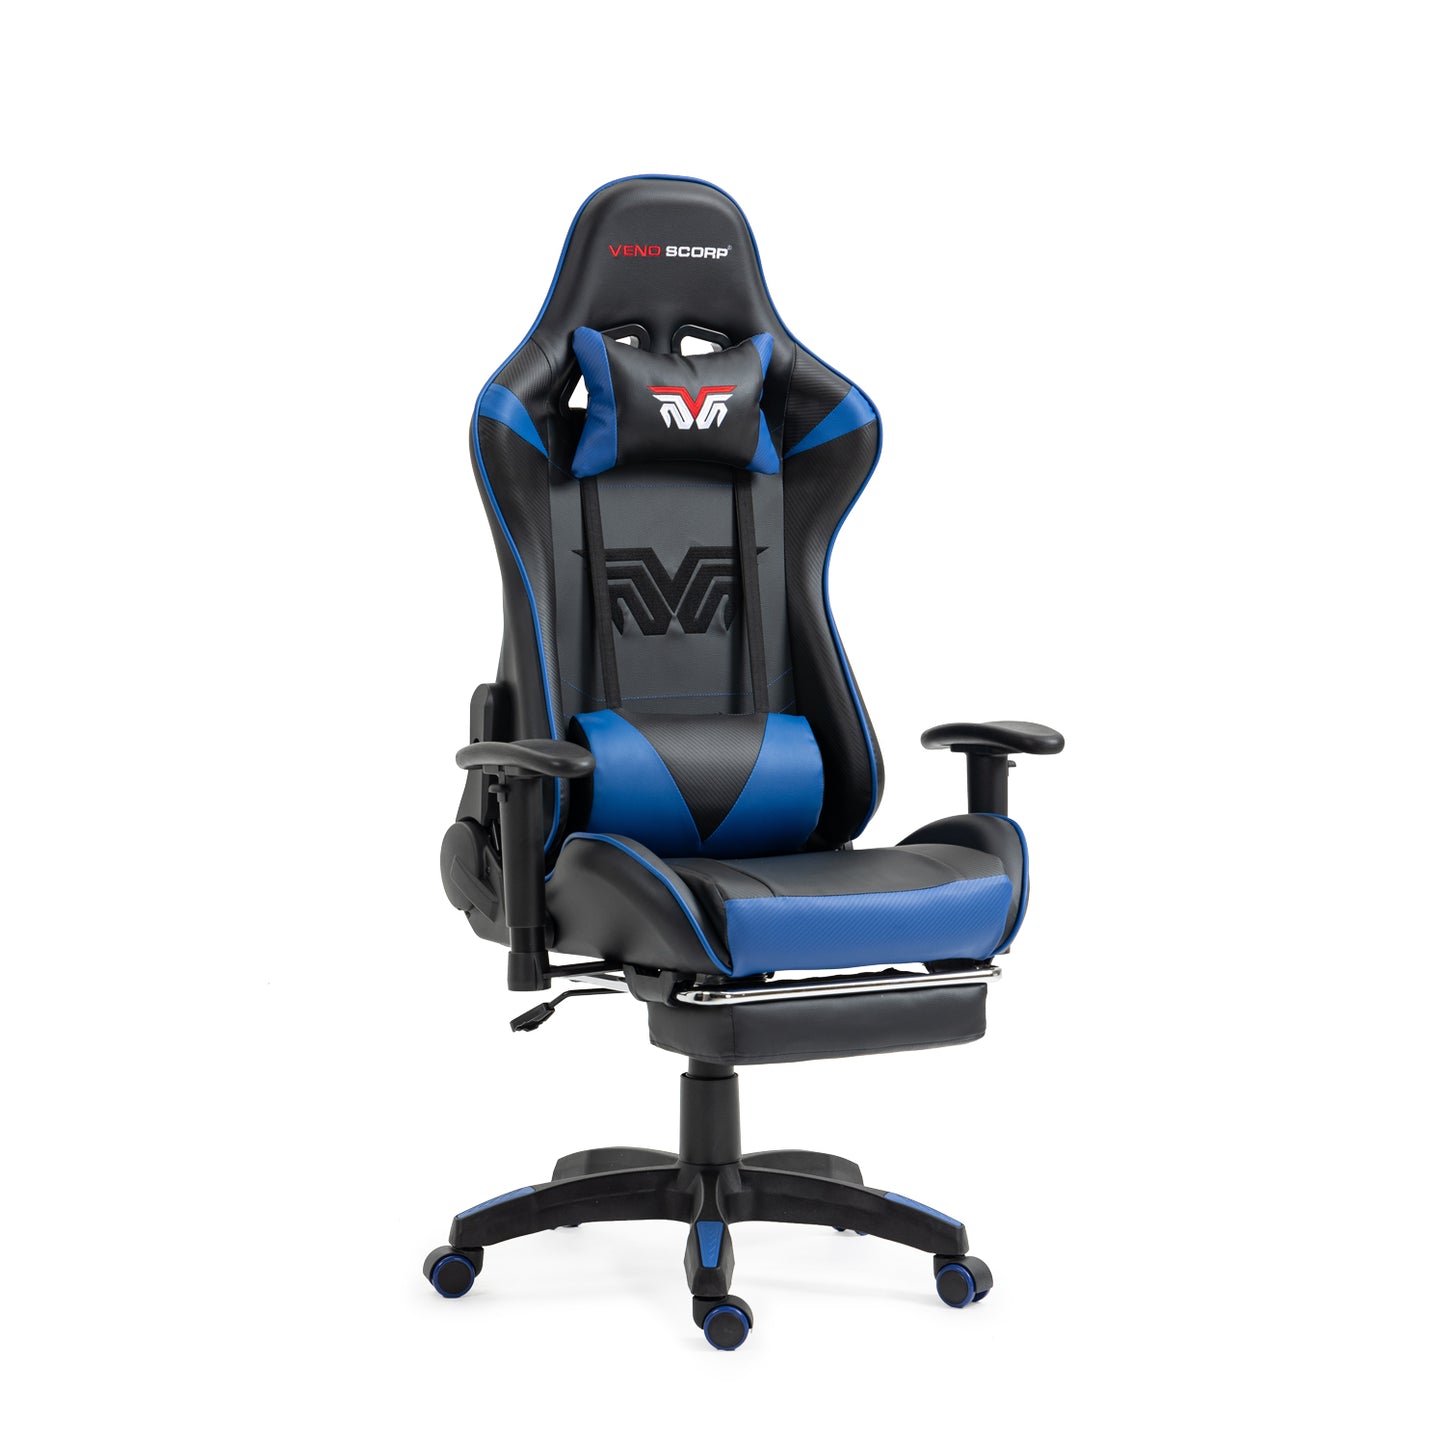 X1 Pro Gaming Chair, Reclining PU Leather Computer Chair with 360 Degree Swivel Seat, Footrest, Removable Headrest and Lumber Support